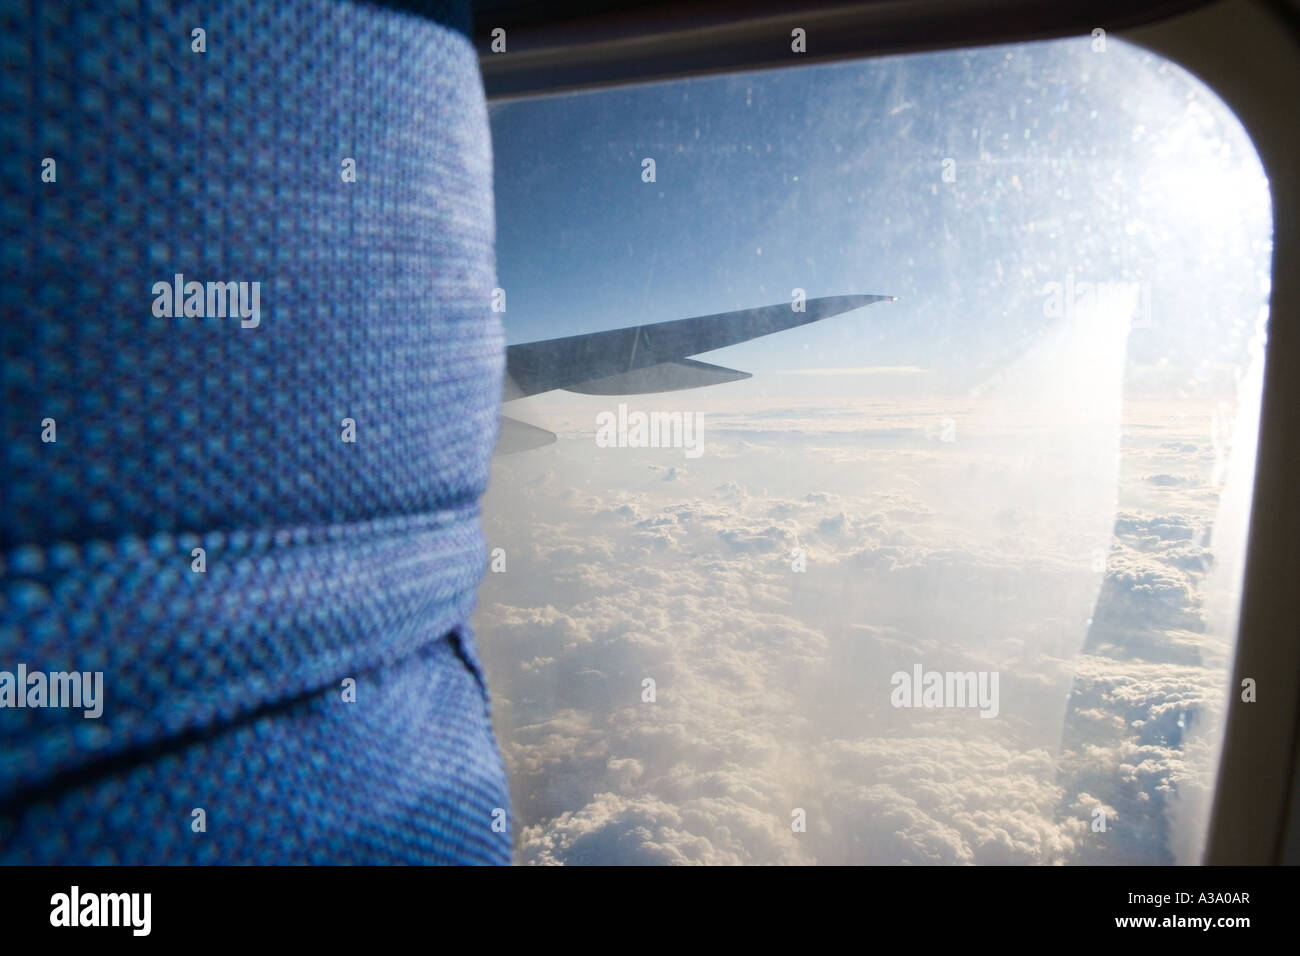 View from aeroplane window and headrest of seat. Stock Photo